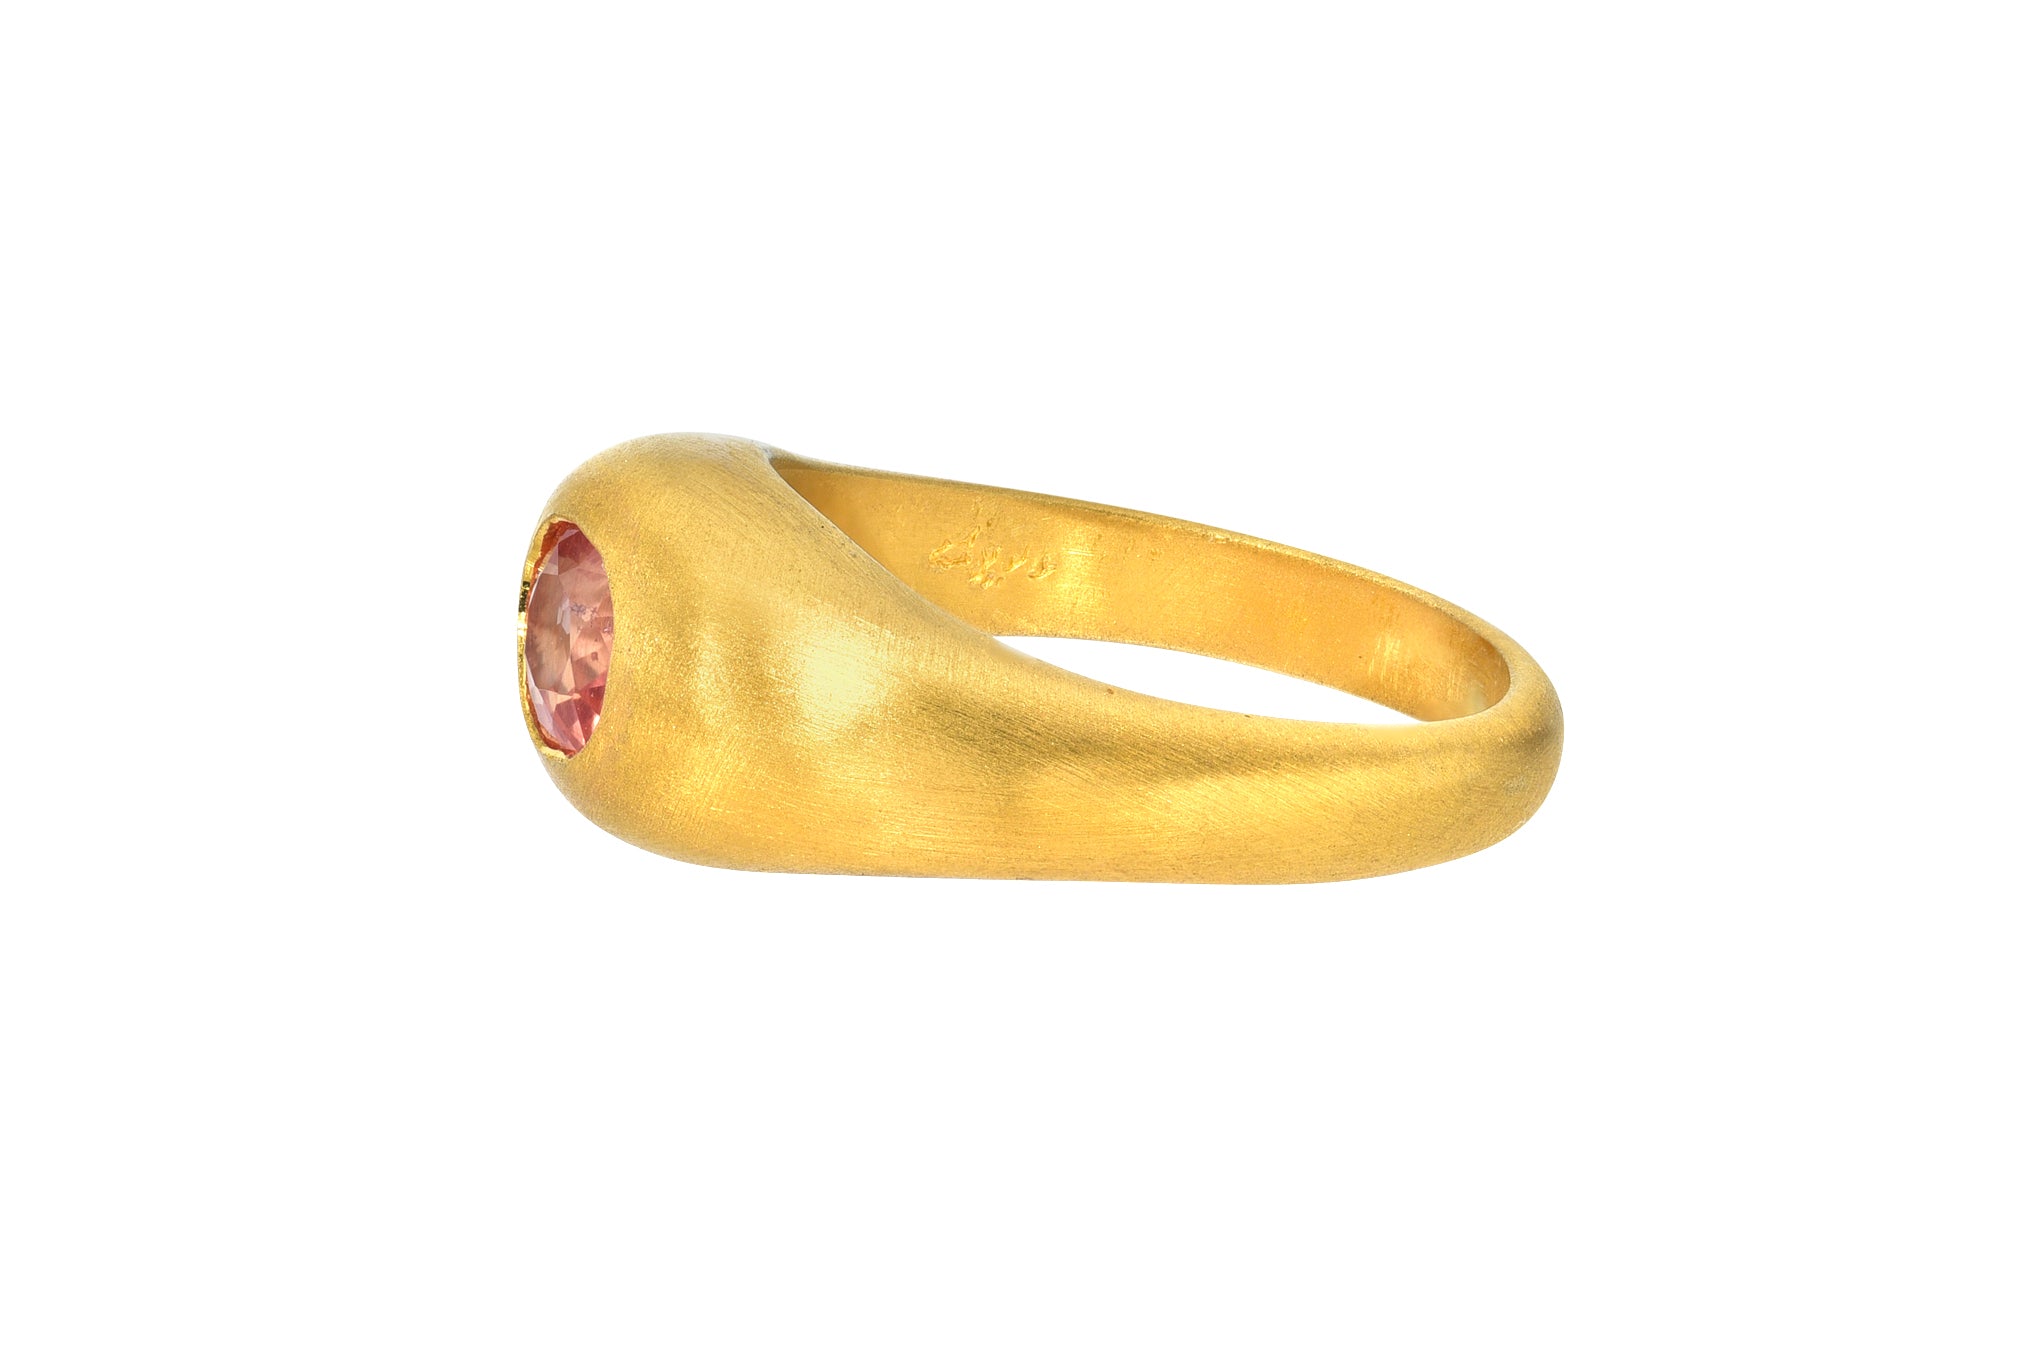 ONE OF A KIND PADPARADSCHA SAPPHIRE GEM SIGNET RING